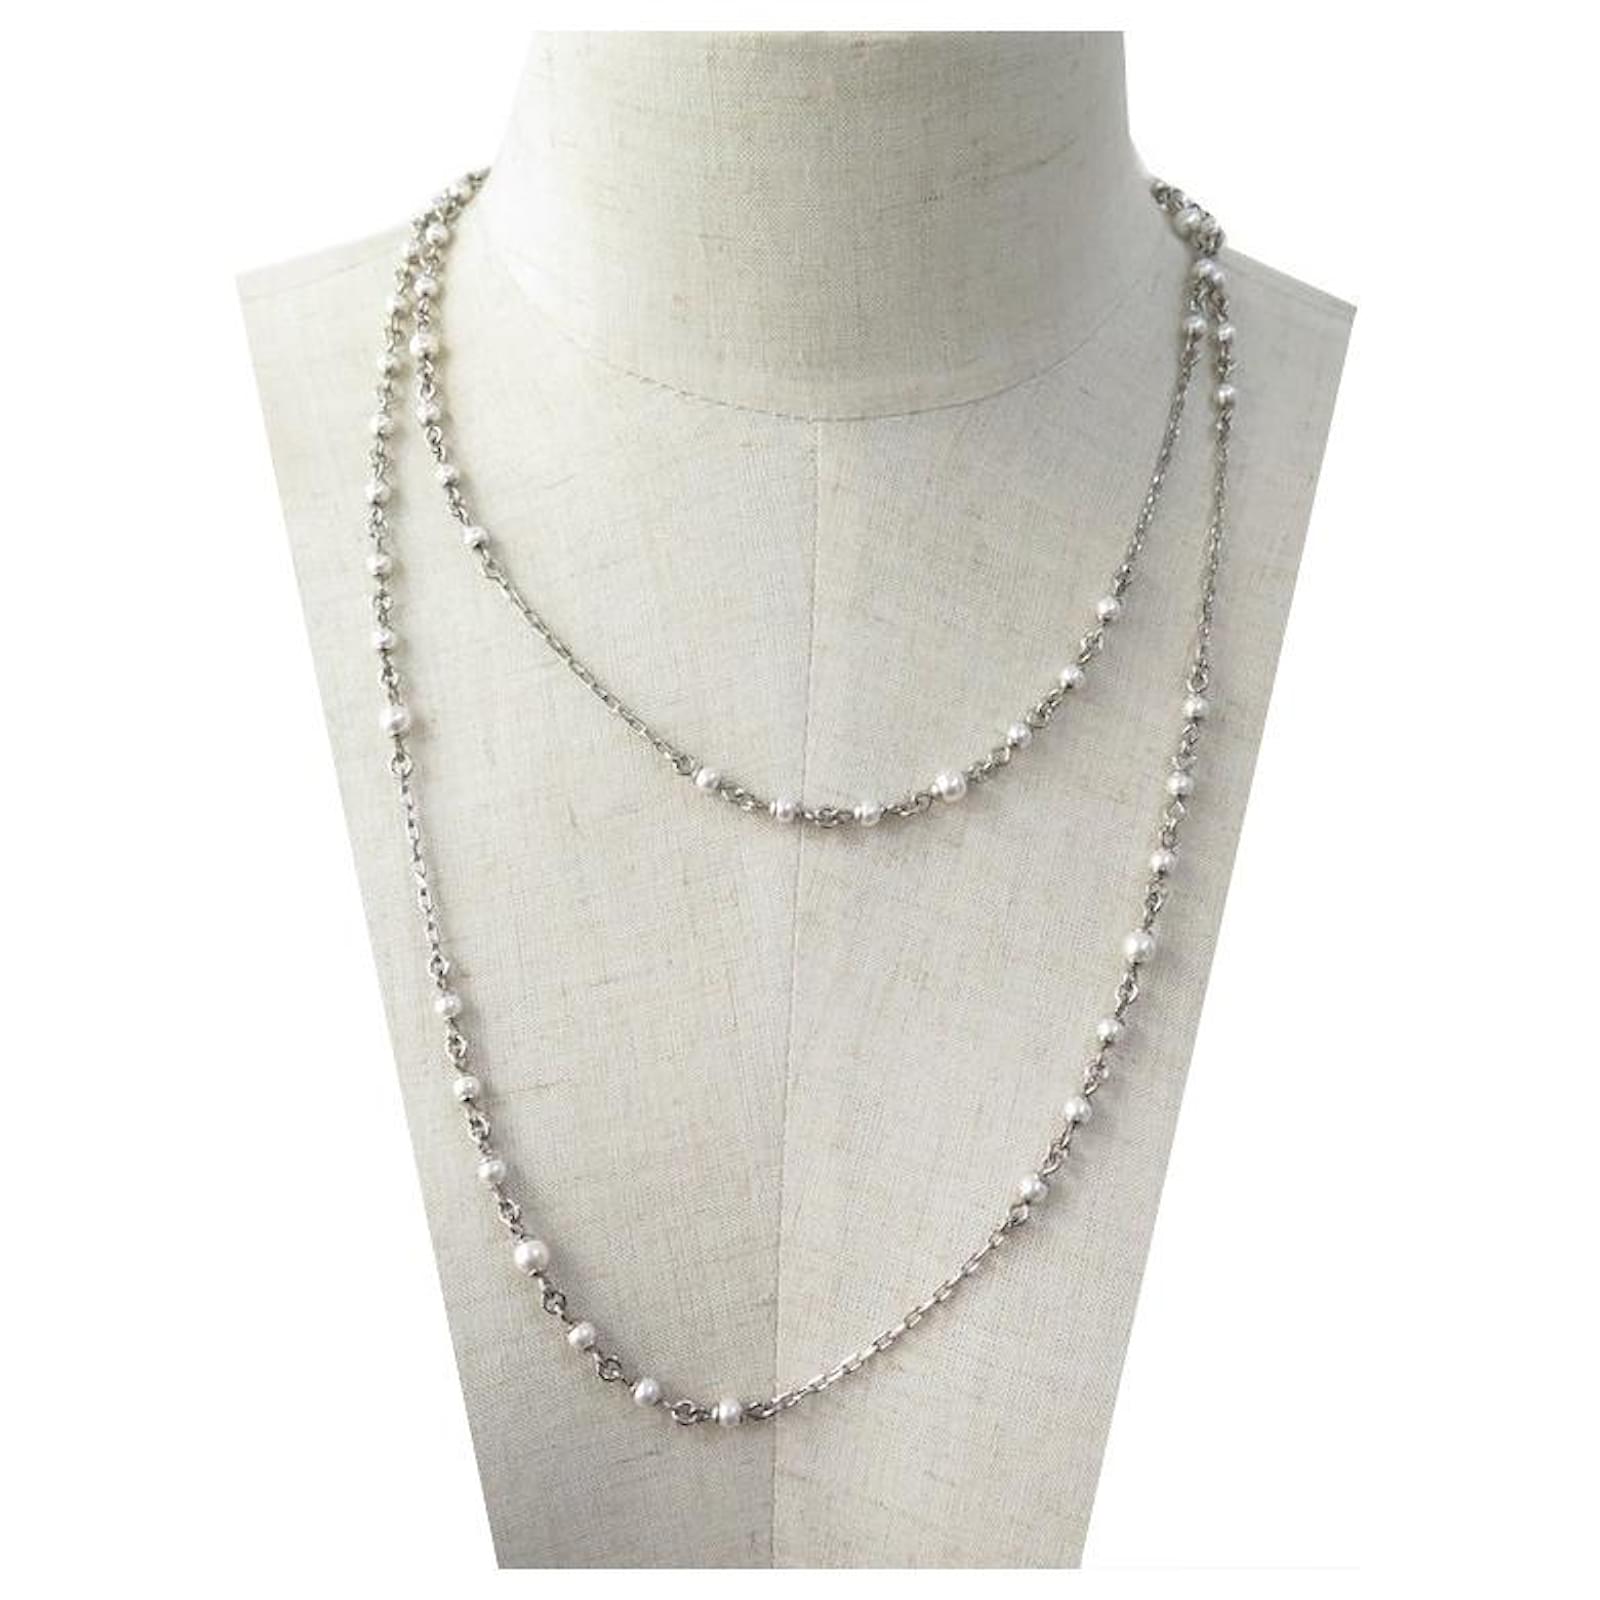 NEW CHANEL NECKLACE SAUTOIR PEARLS AND SILVER METAL CHAIN NEW